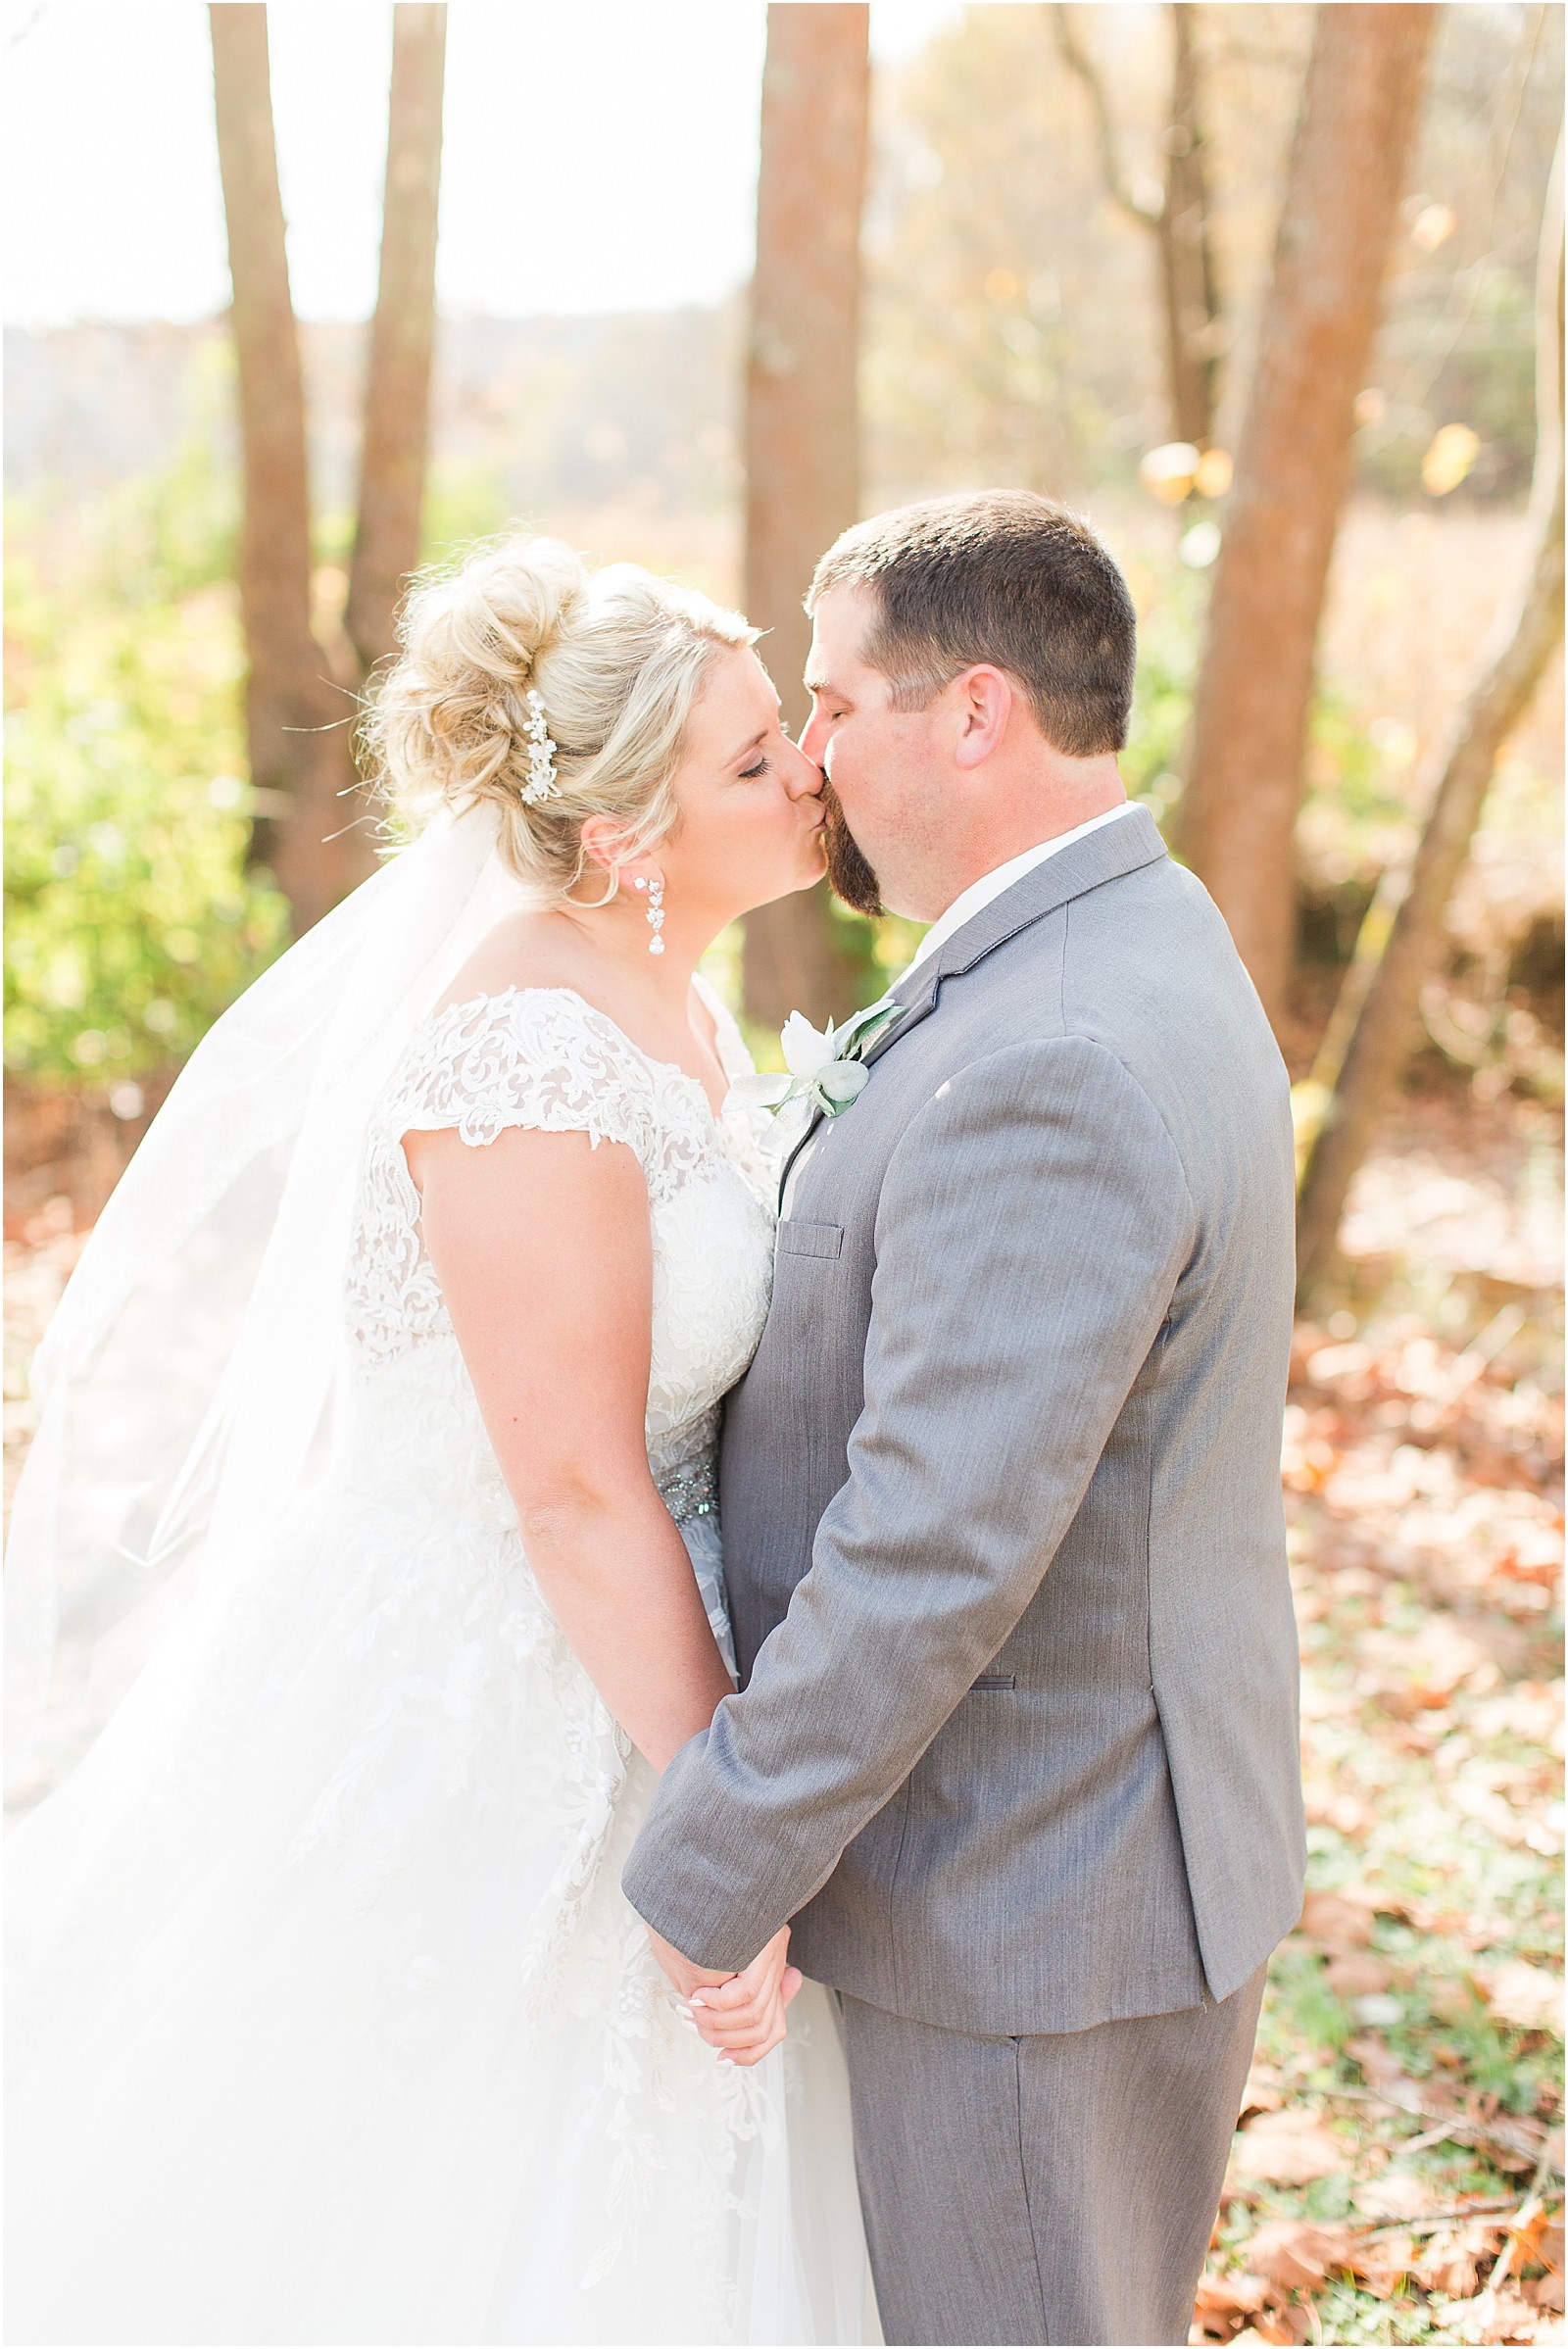 A Navy and Blush Wedding in Tell City Indiana | Brianna and Matt | Bret and Brandie Photography 0091.jpg